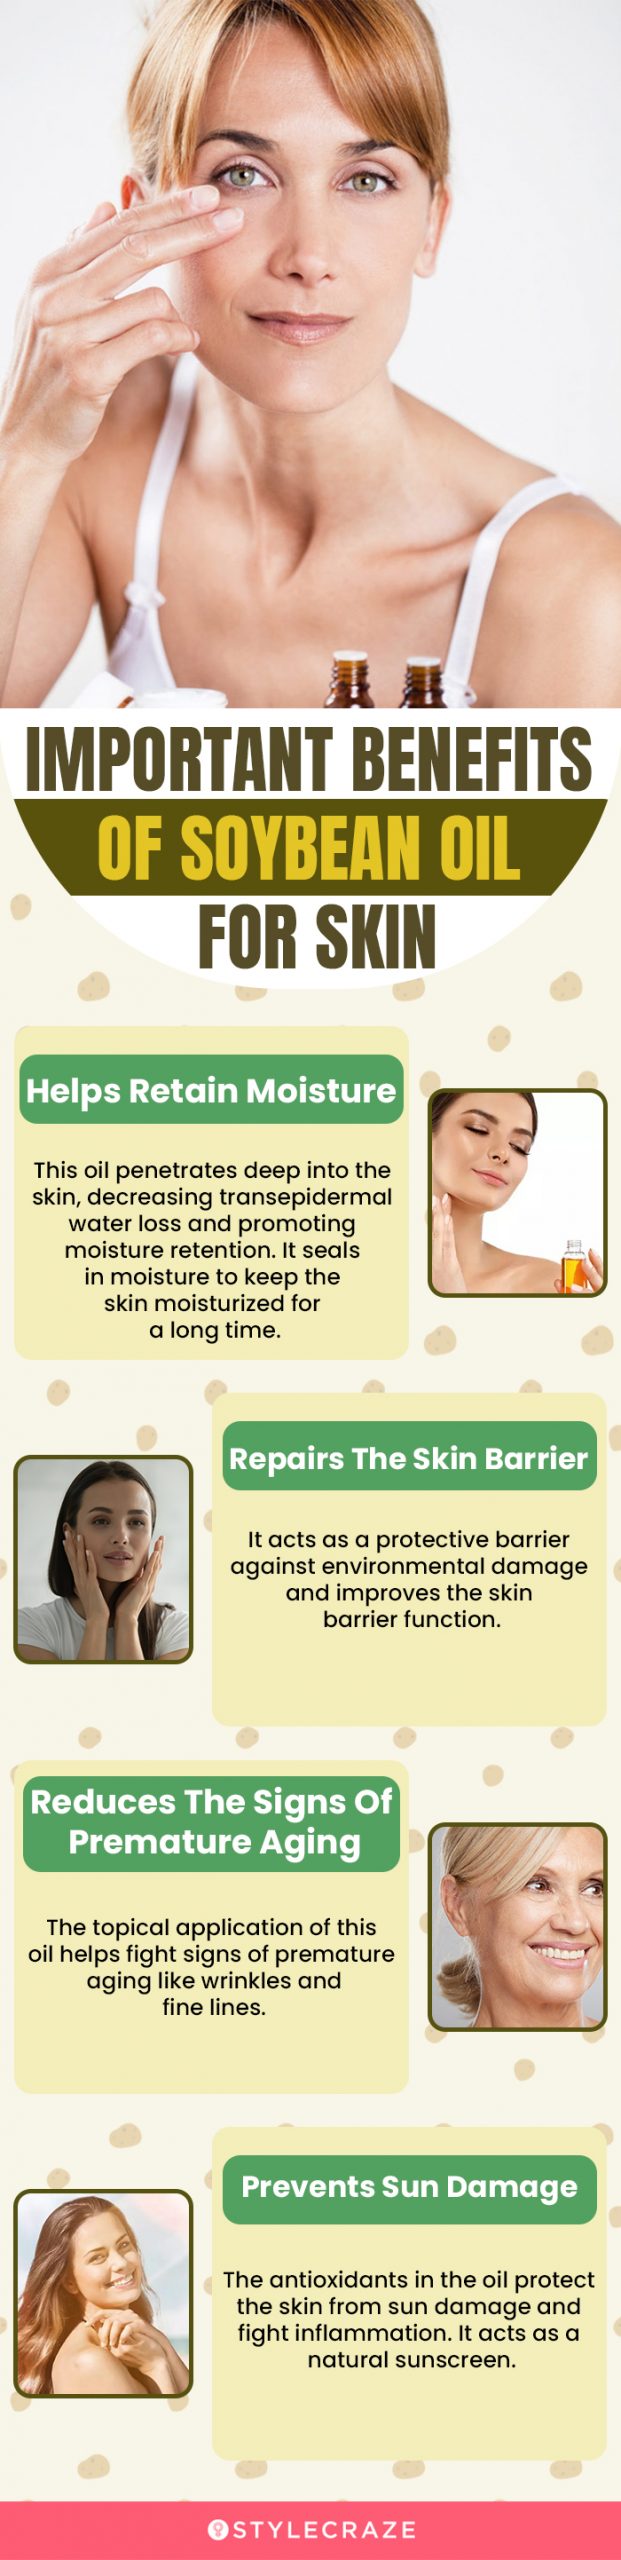 important benefits of soybean oil for skin (infographic)